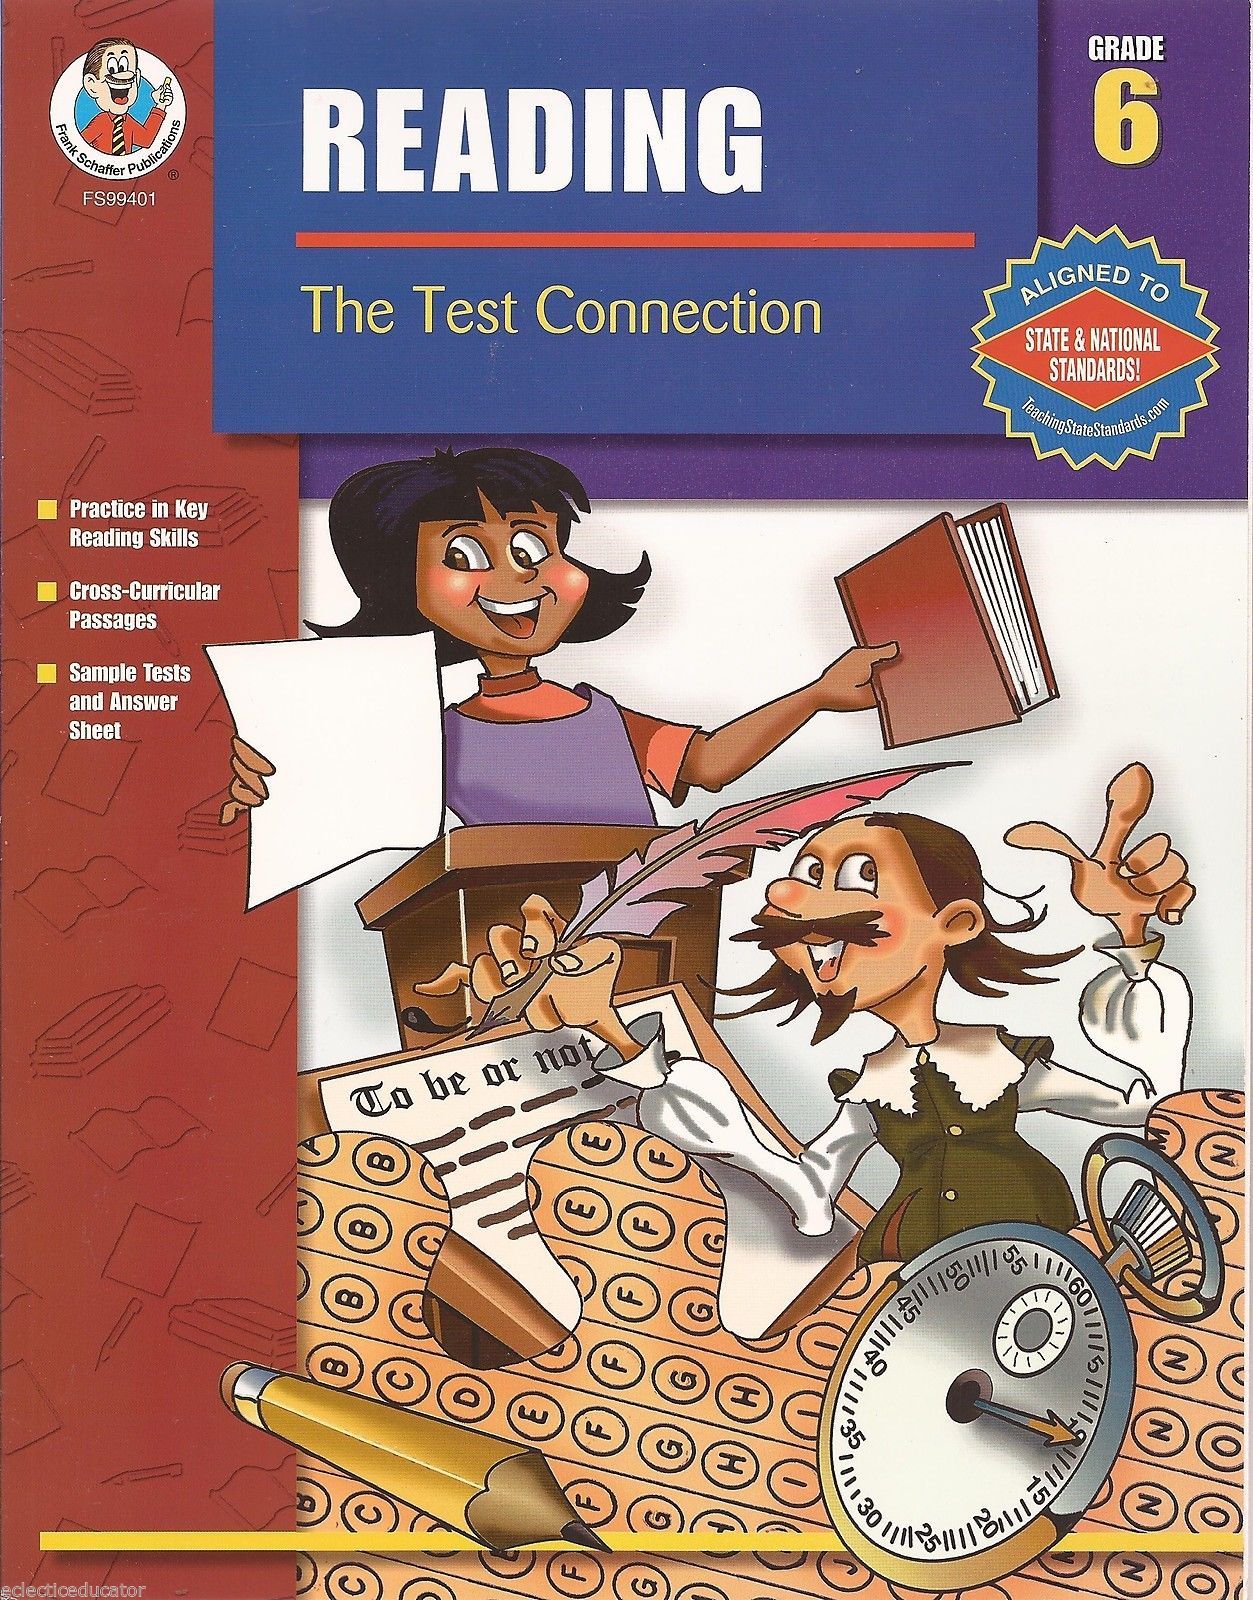 Reading The Test Connection By Frank Schaffer Grade 6 New Workbook